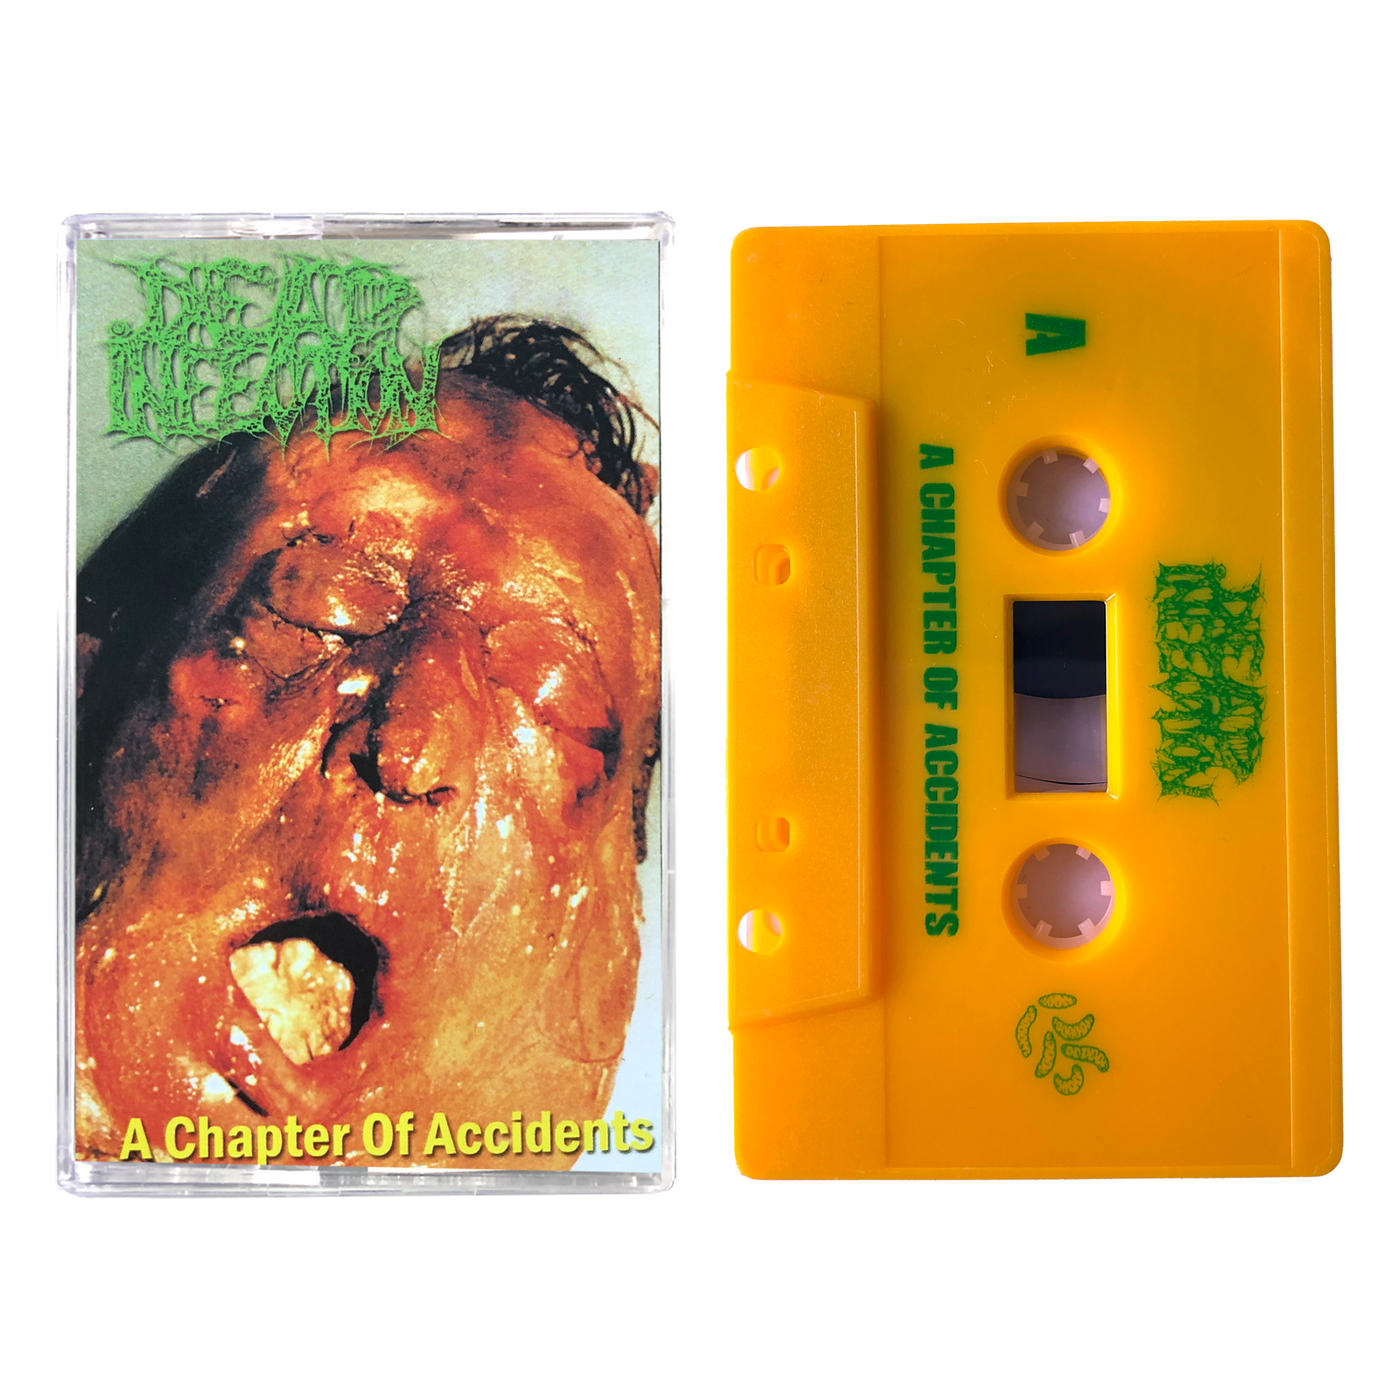 Dead Infection 'A Chapter Of Accidents' Cassette